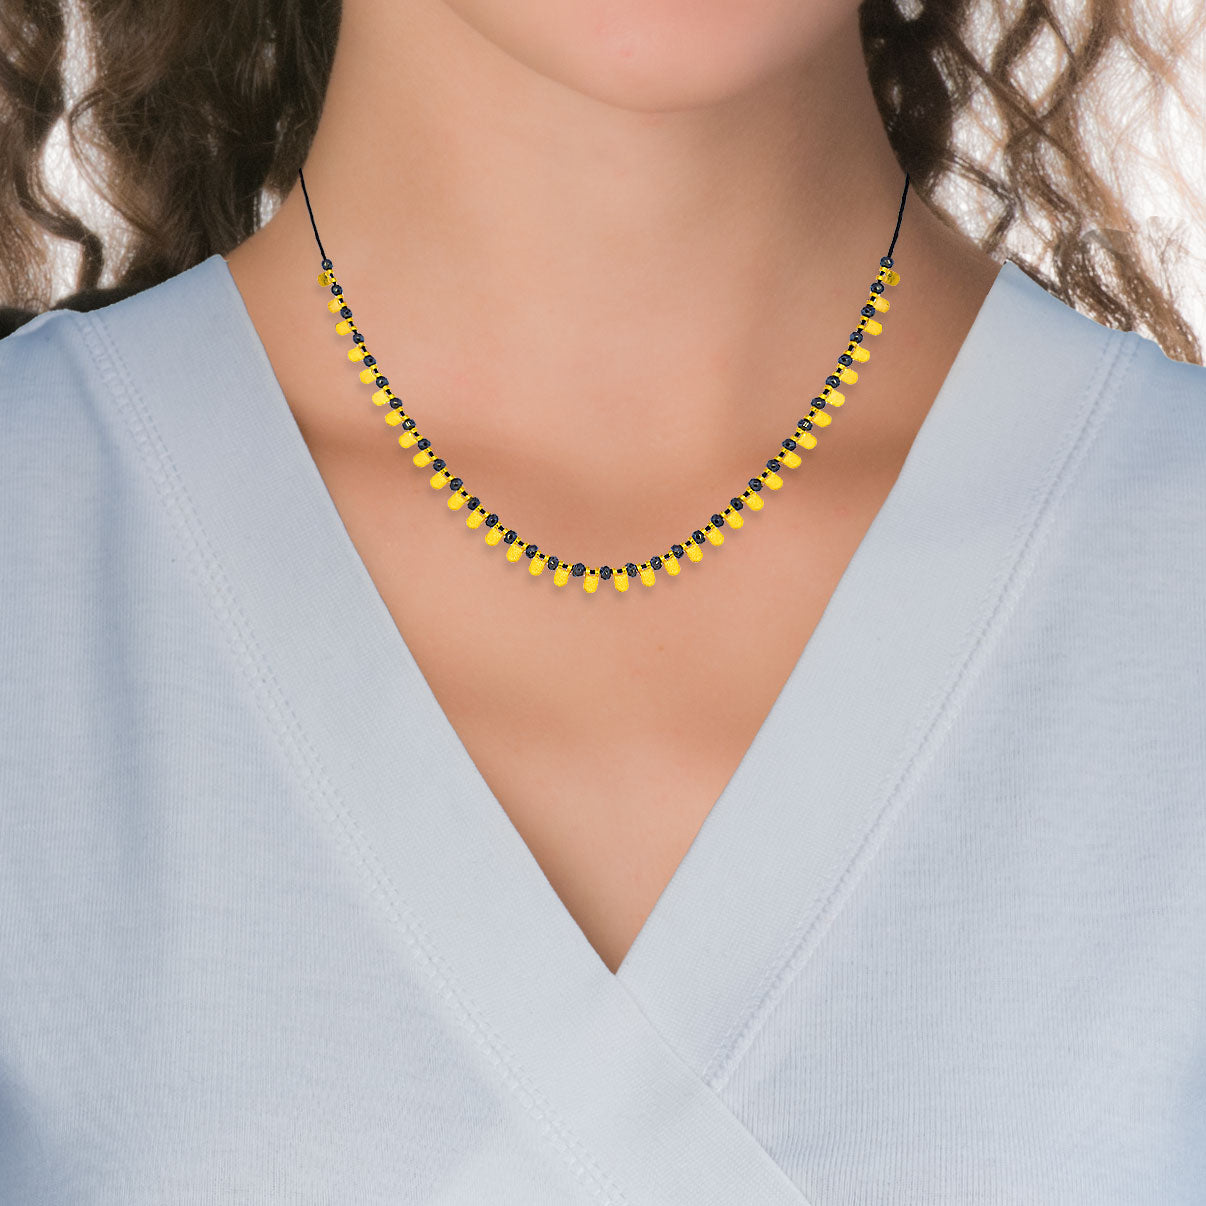 Handmade Short Necklace With Gold Plated Silver Elements & Hematite Stones - Anthos Crafts